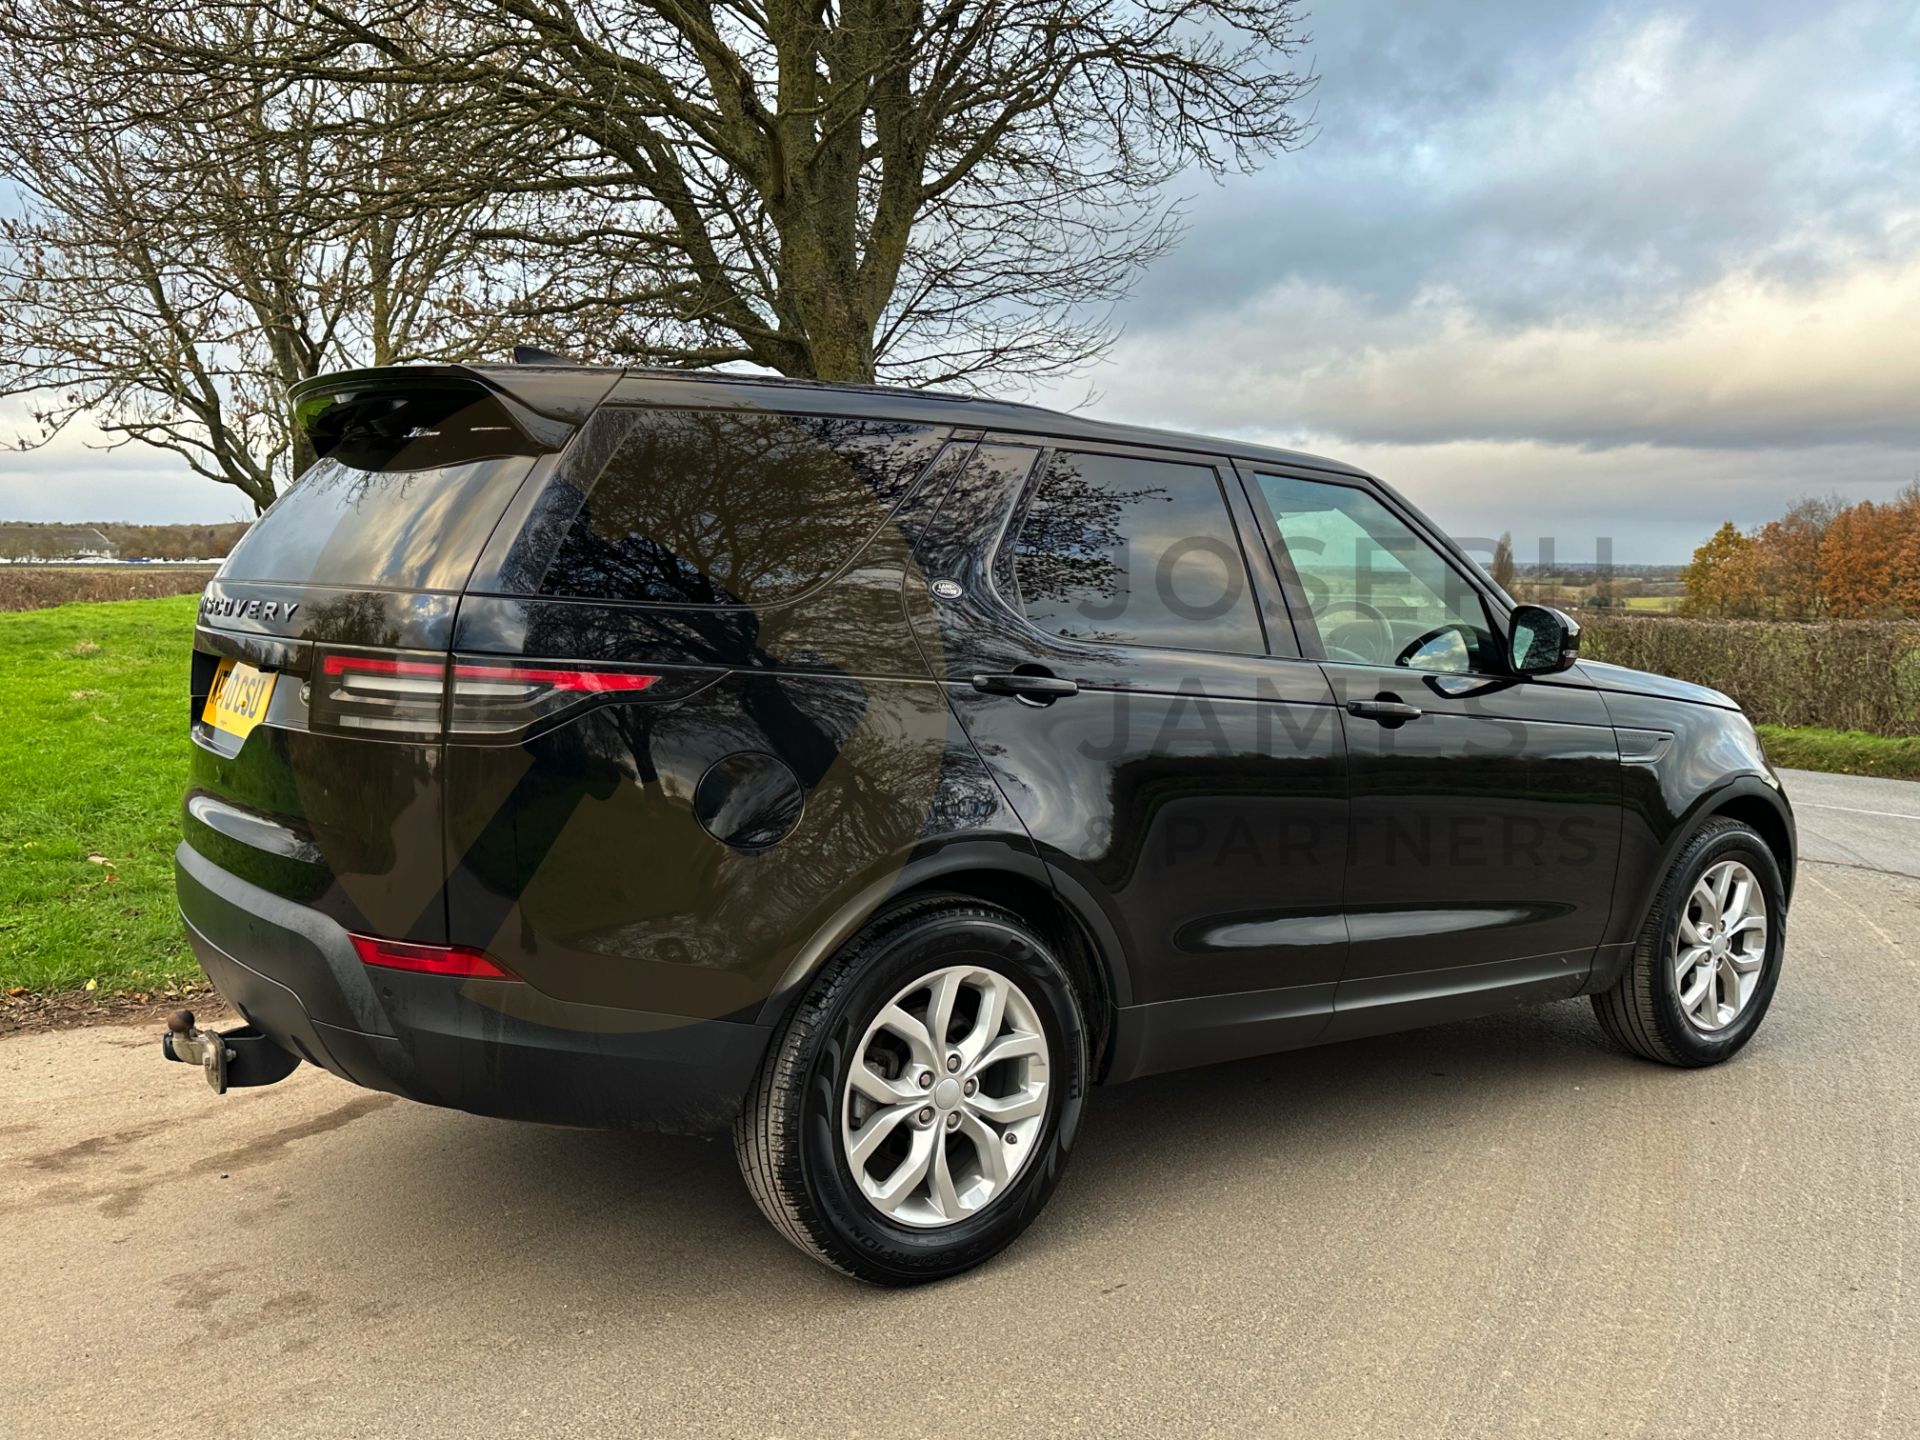 LAND ROVER DISCOVERY 5 *ALL NEW MODEL* (2021 - EURO 6) 8 SPEED AUTO (1 OWNER) *ONLY 19,000 MILES* - Image 13 of 50